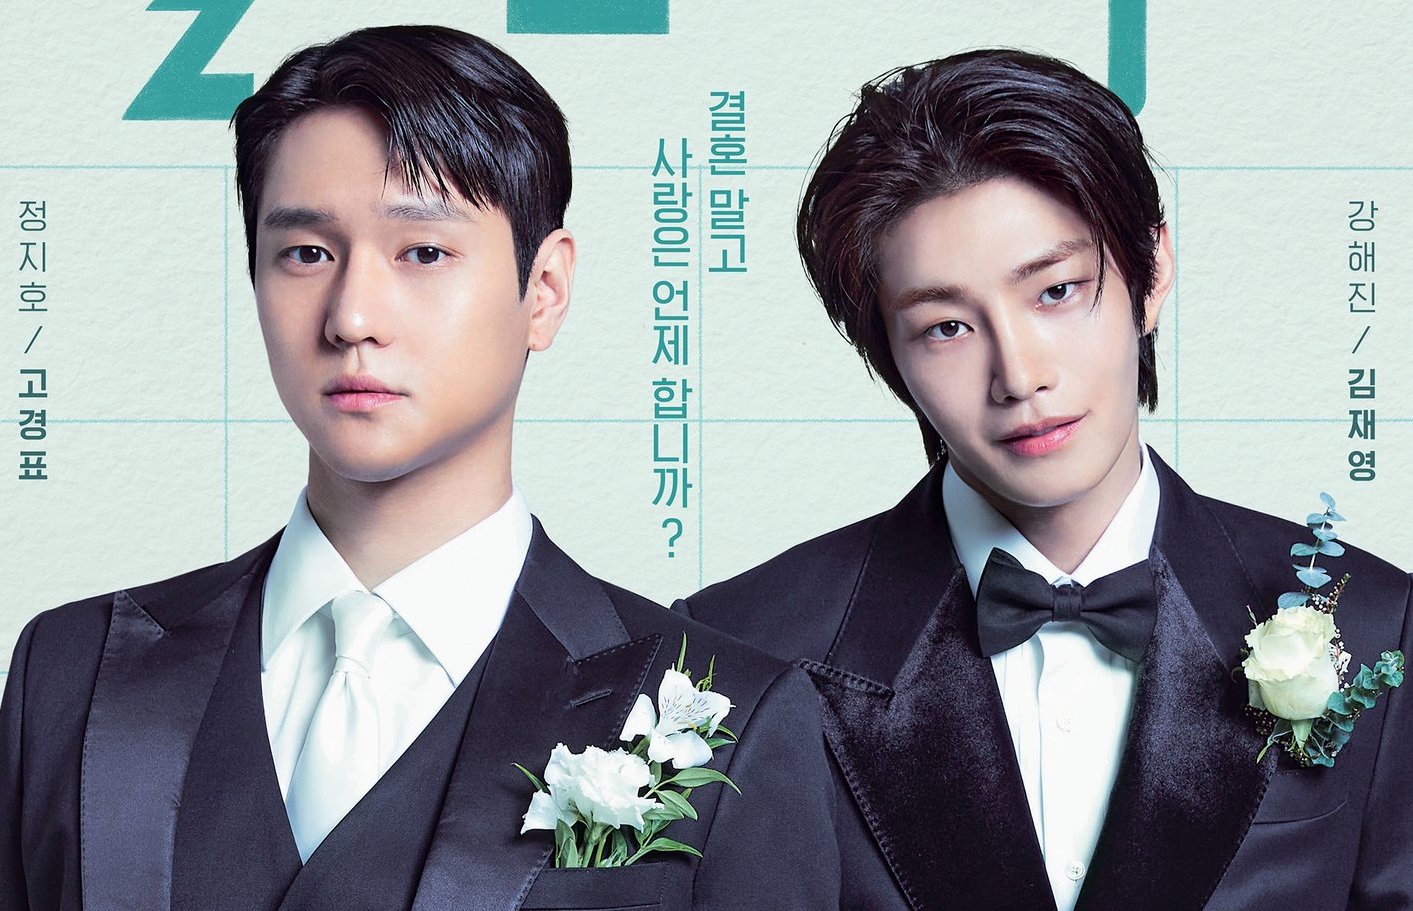 It’s a groom face-off in new posters for tvN’s Love in Contract